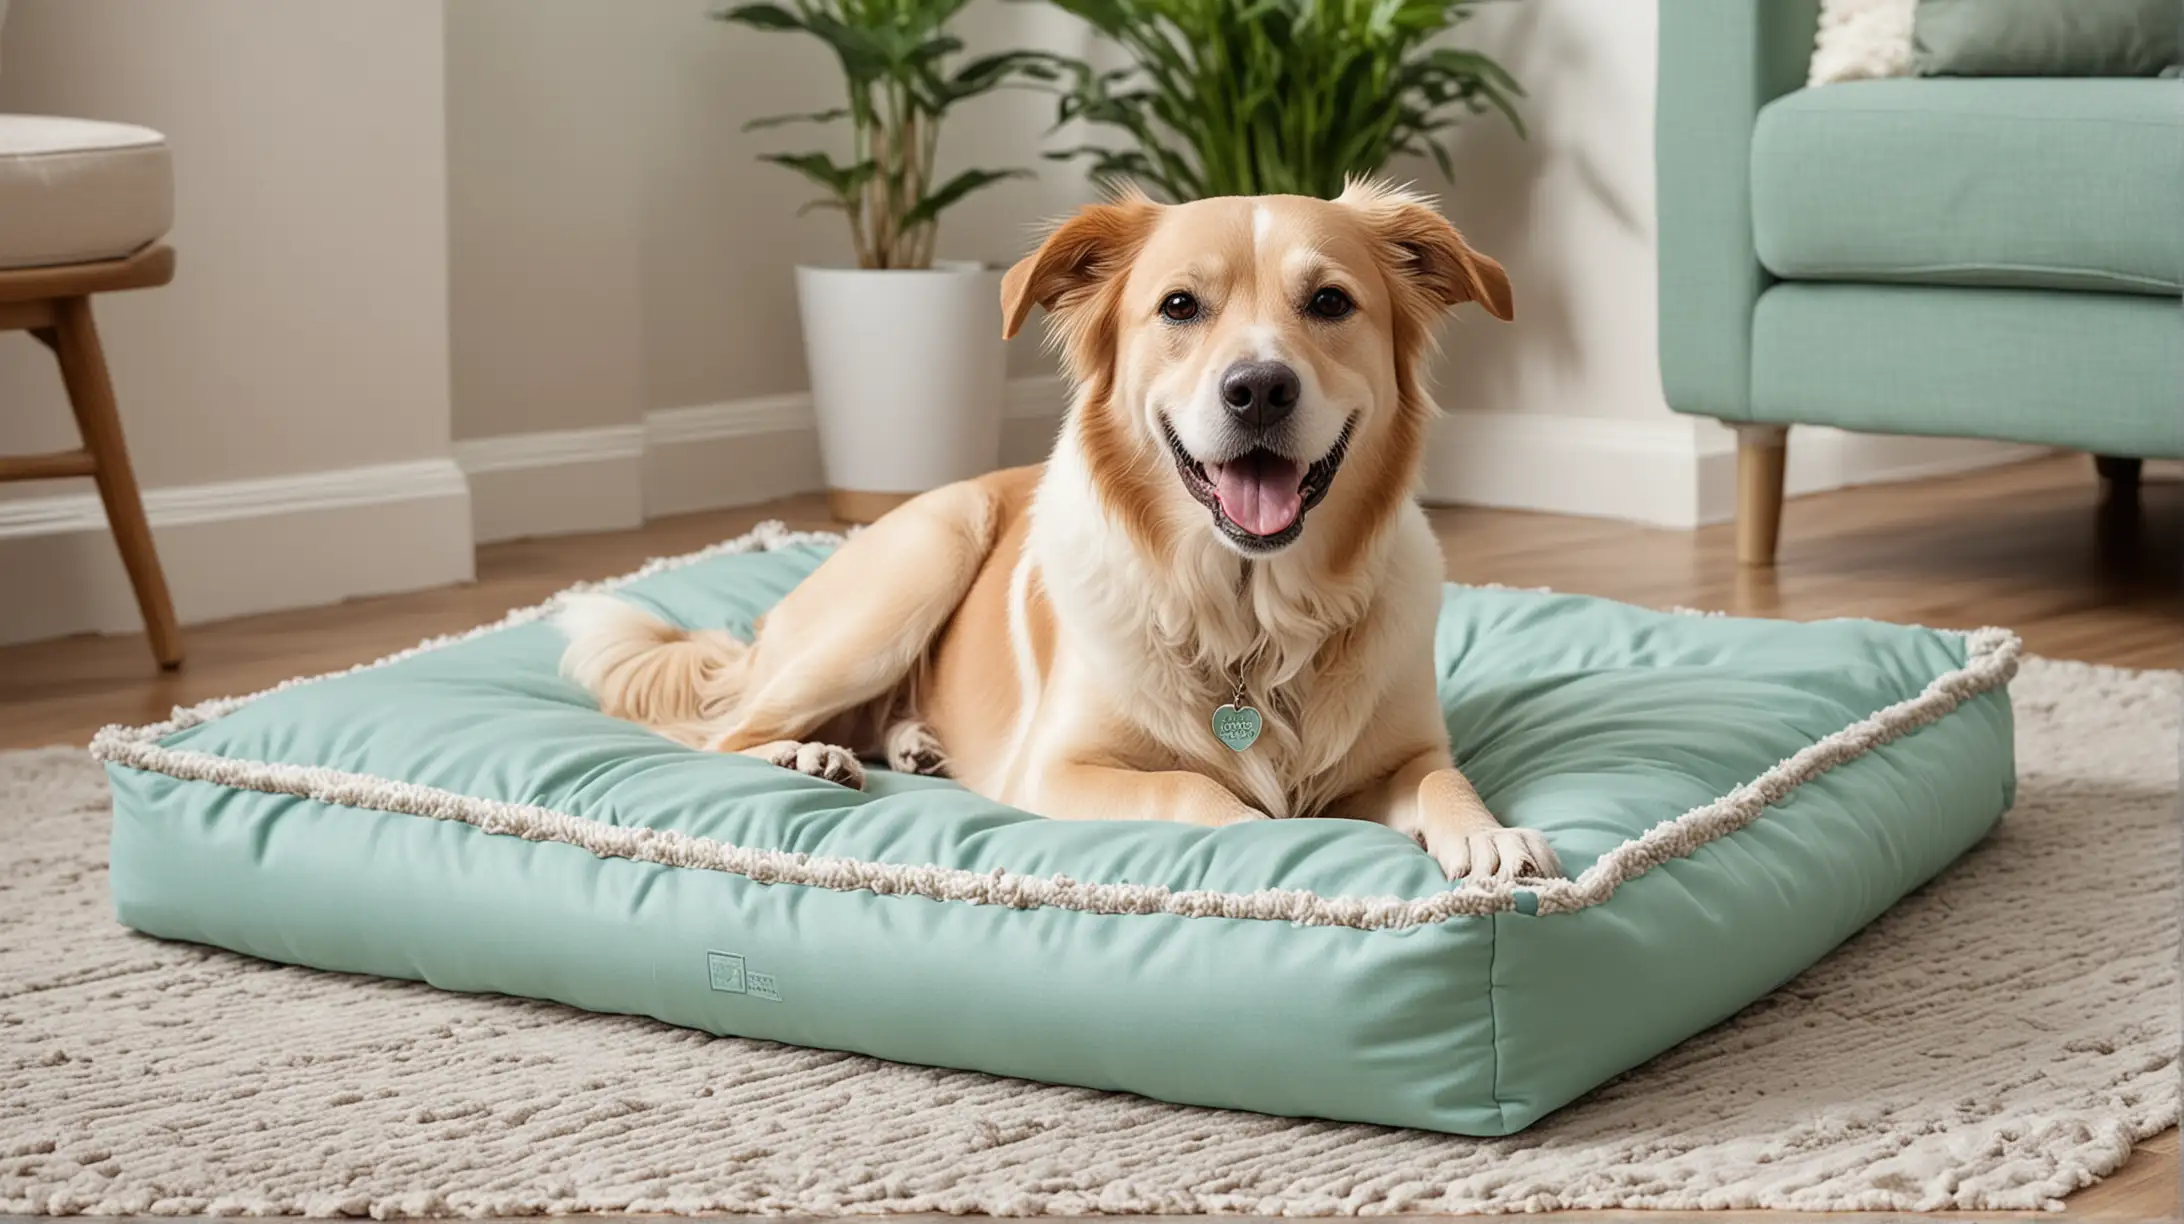 Tranquil Dog Relaxing on Stylish ChewResistant Dog Bed in Luxurious Home